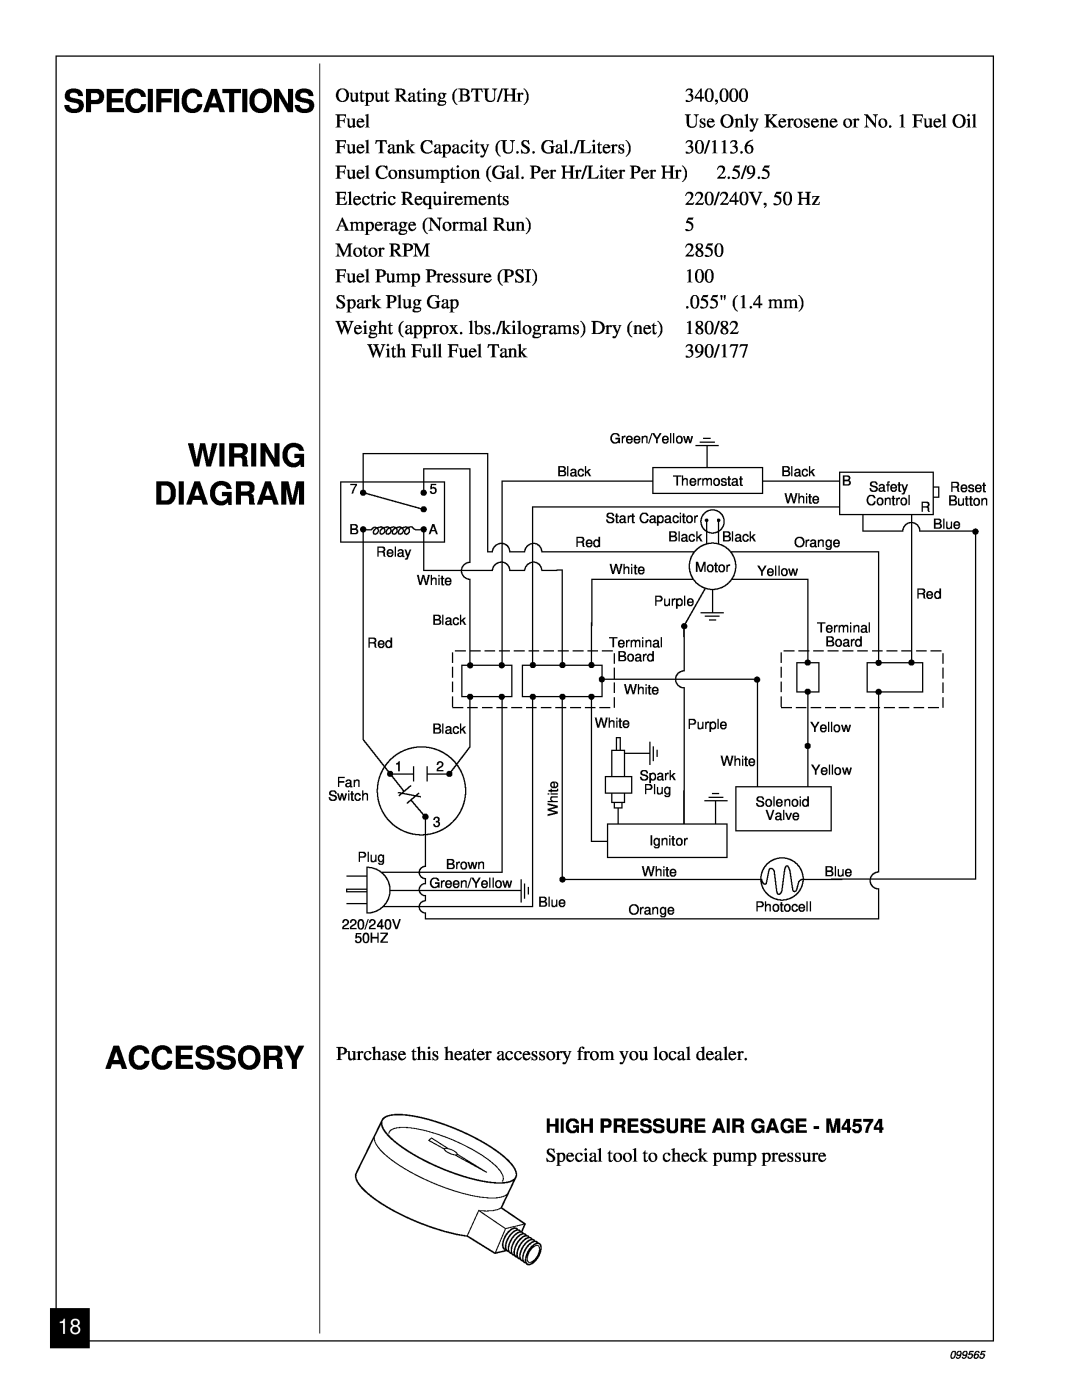 Master Lock B350EAI owner manual Wiring Diagram Accessory, Specifications, HIGH PRESSURE AIR GAGE - M4574 